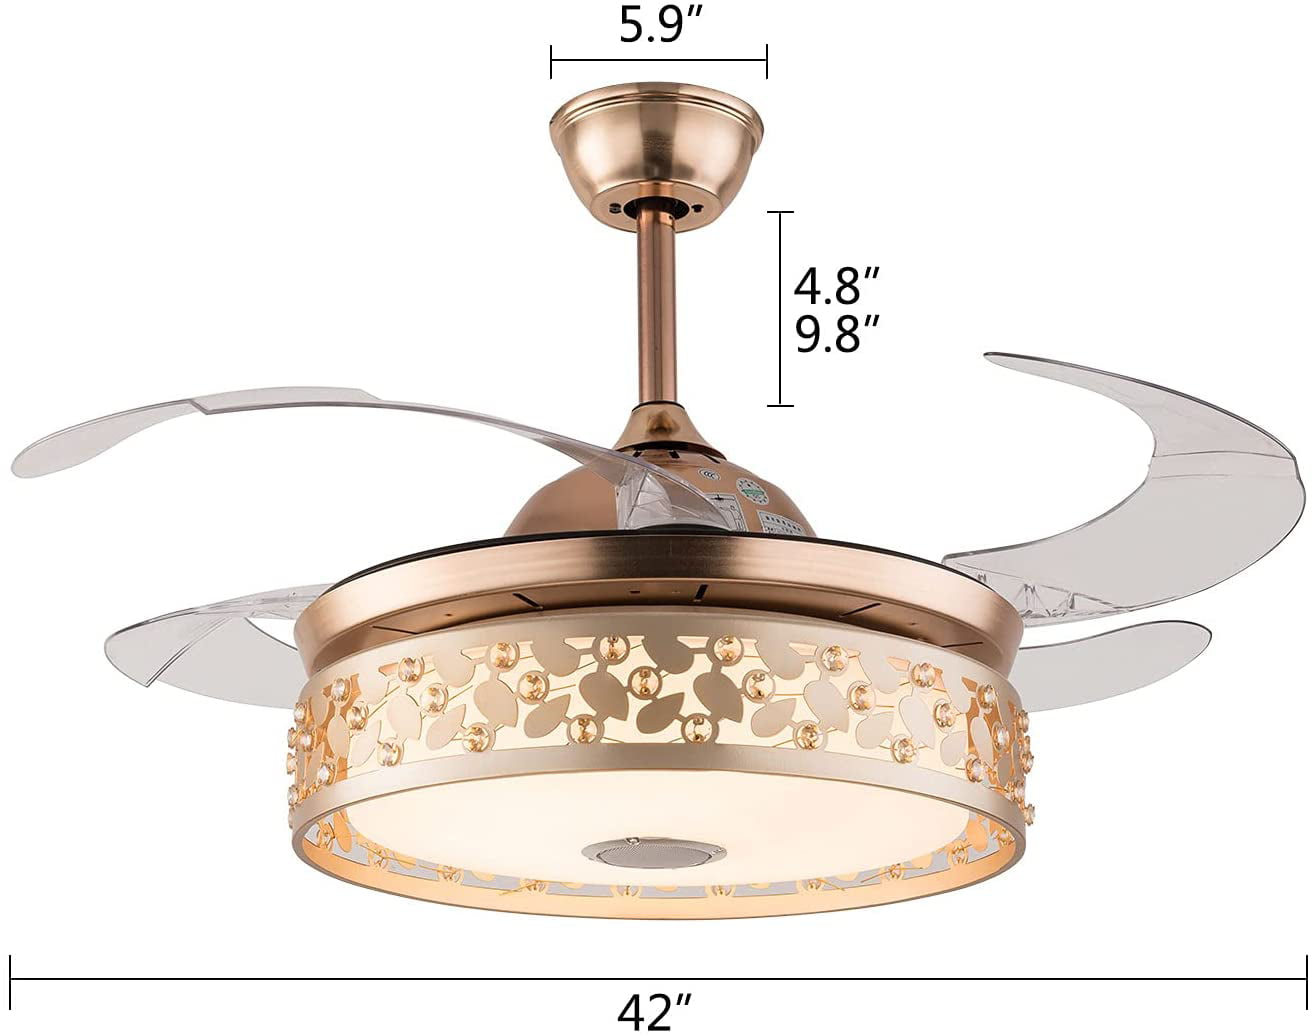 42" Invisible LED Ceiling Fan Light Remote Control Chandelier Bluetooth Speaker